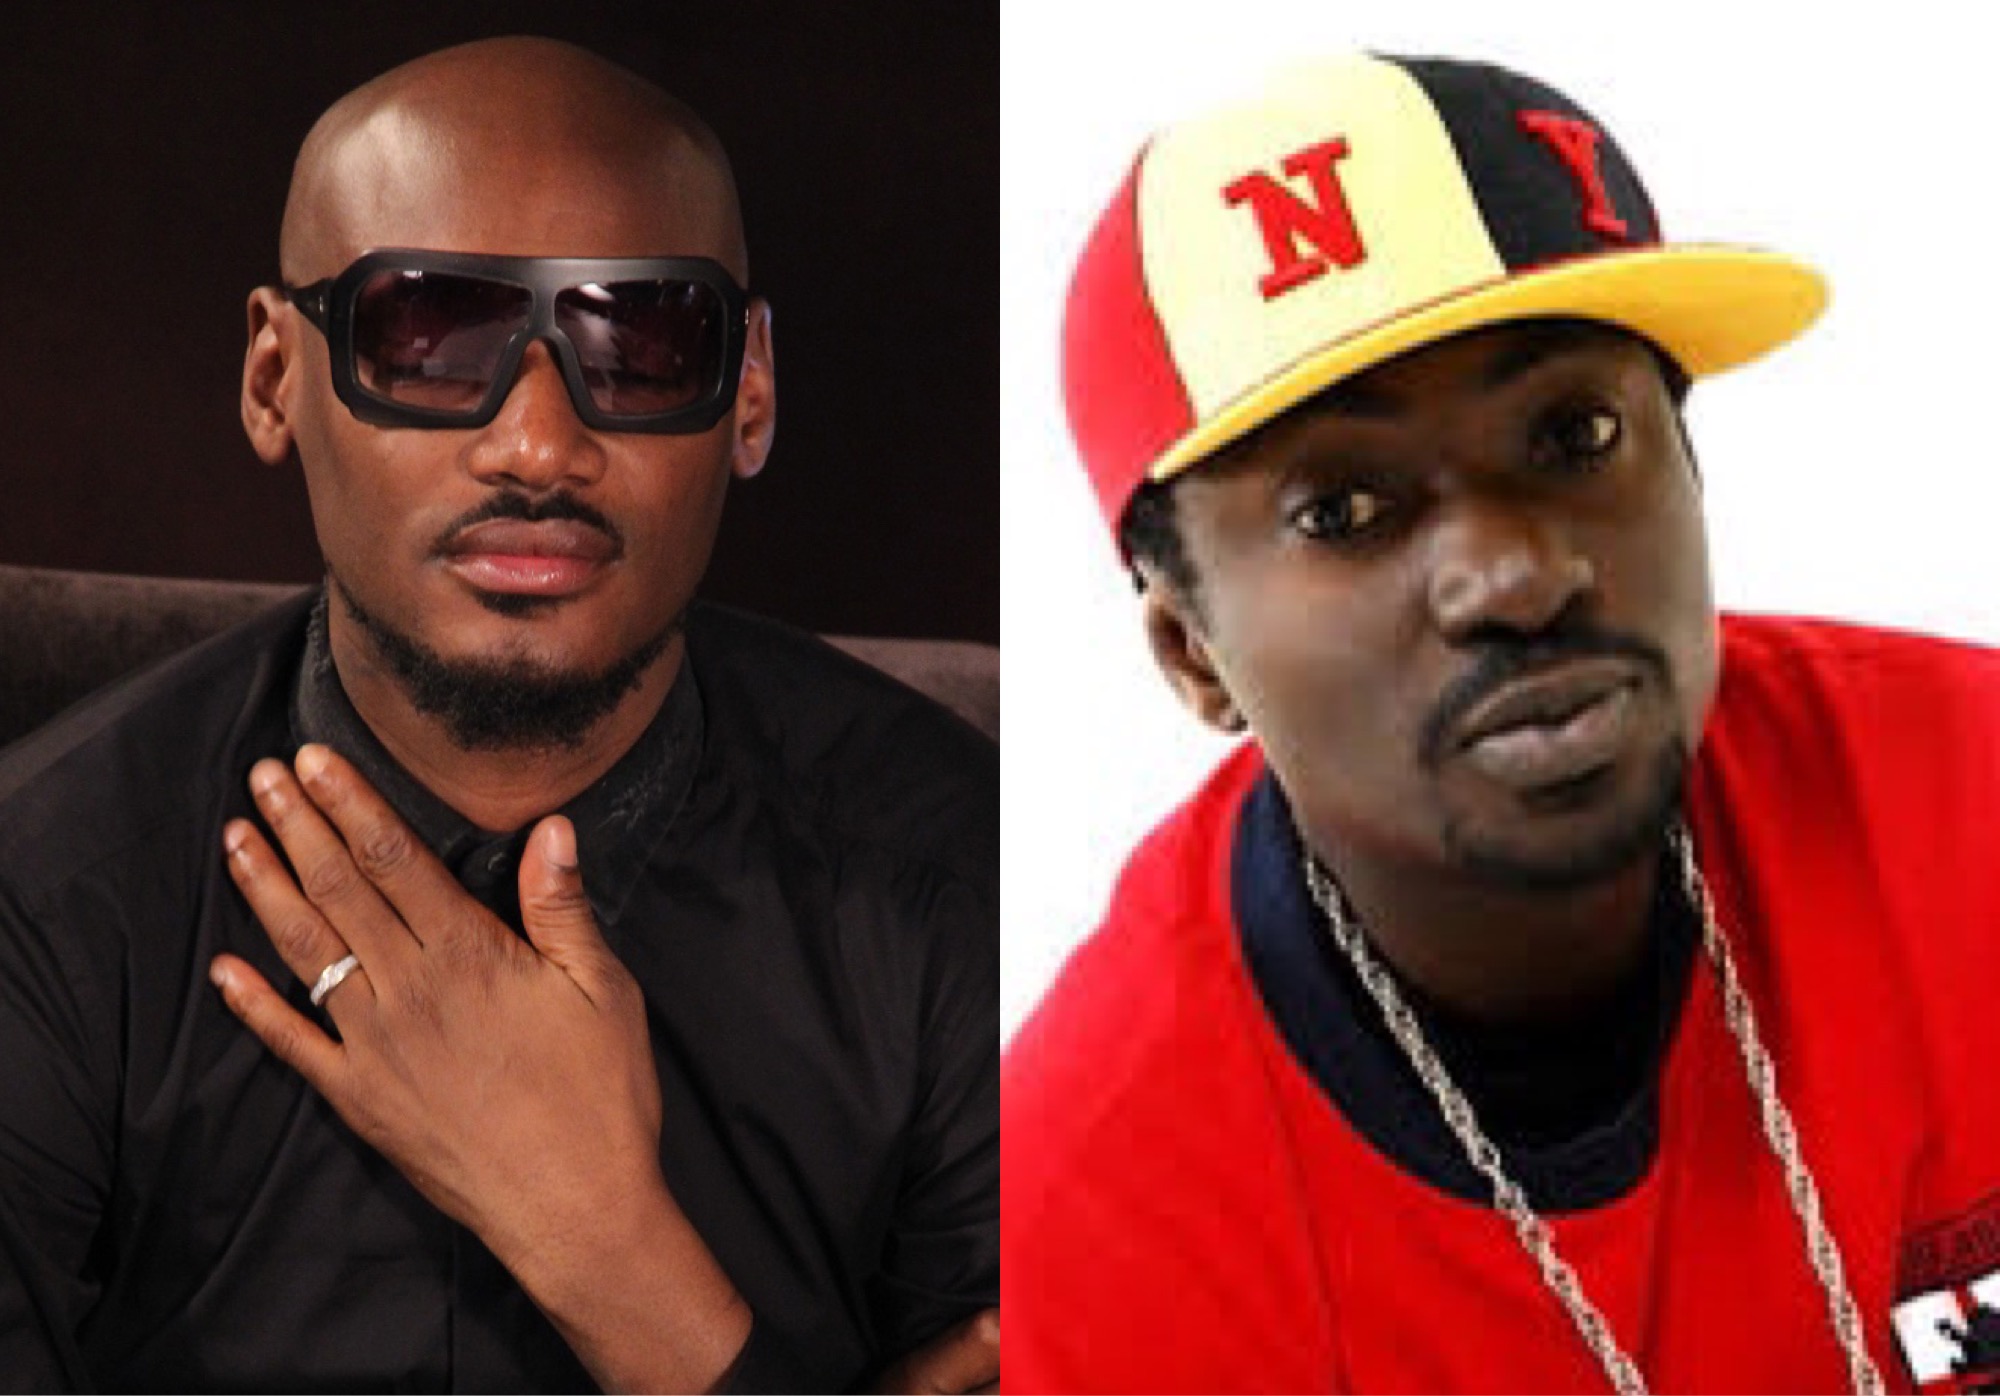 Blackface Calls Out 2Face For Not Informing Him About An Old Friend’s Death